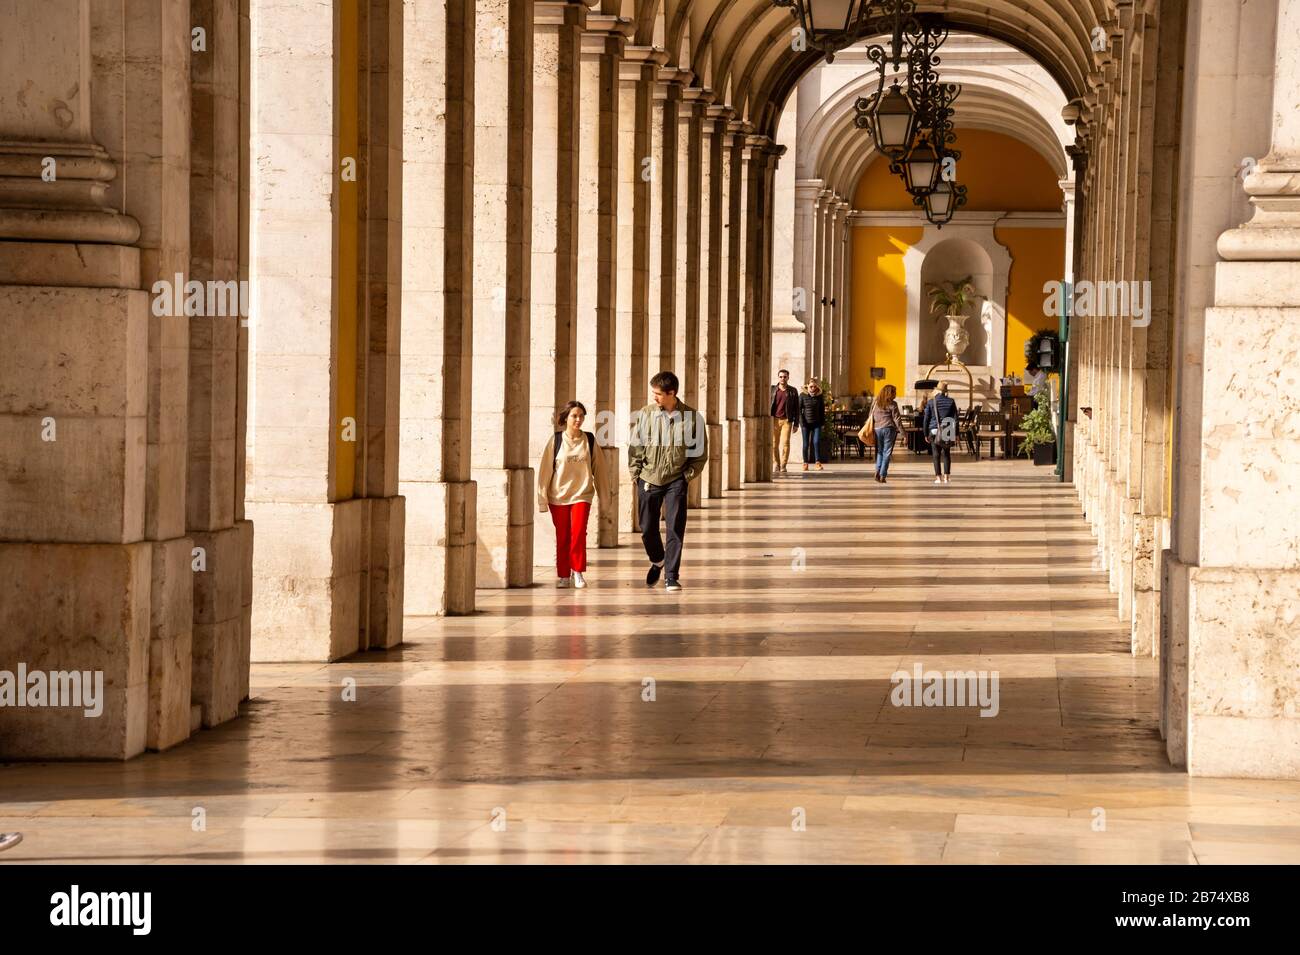 Lisbon, Portugal - 2 March 2020: Pedestrians walking the walkway under Ministry of Justice building near the Arco da Rua Augusta Stock Photo